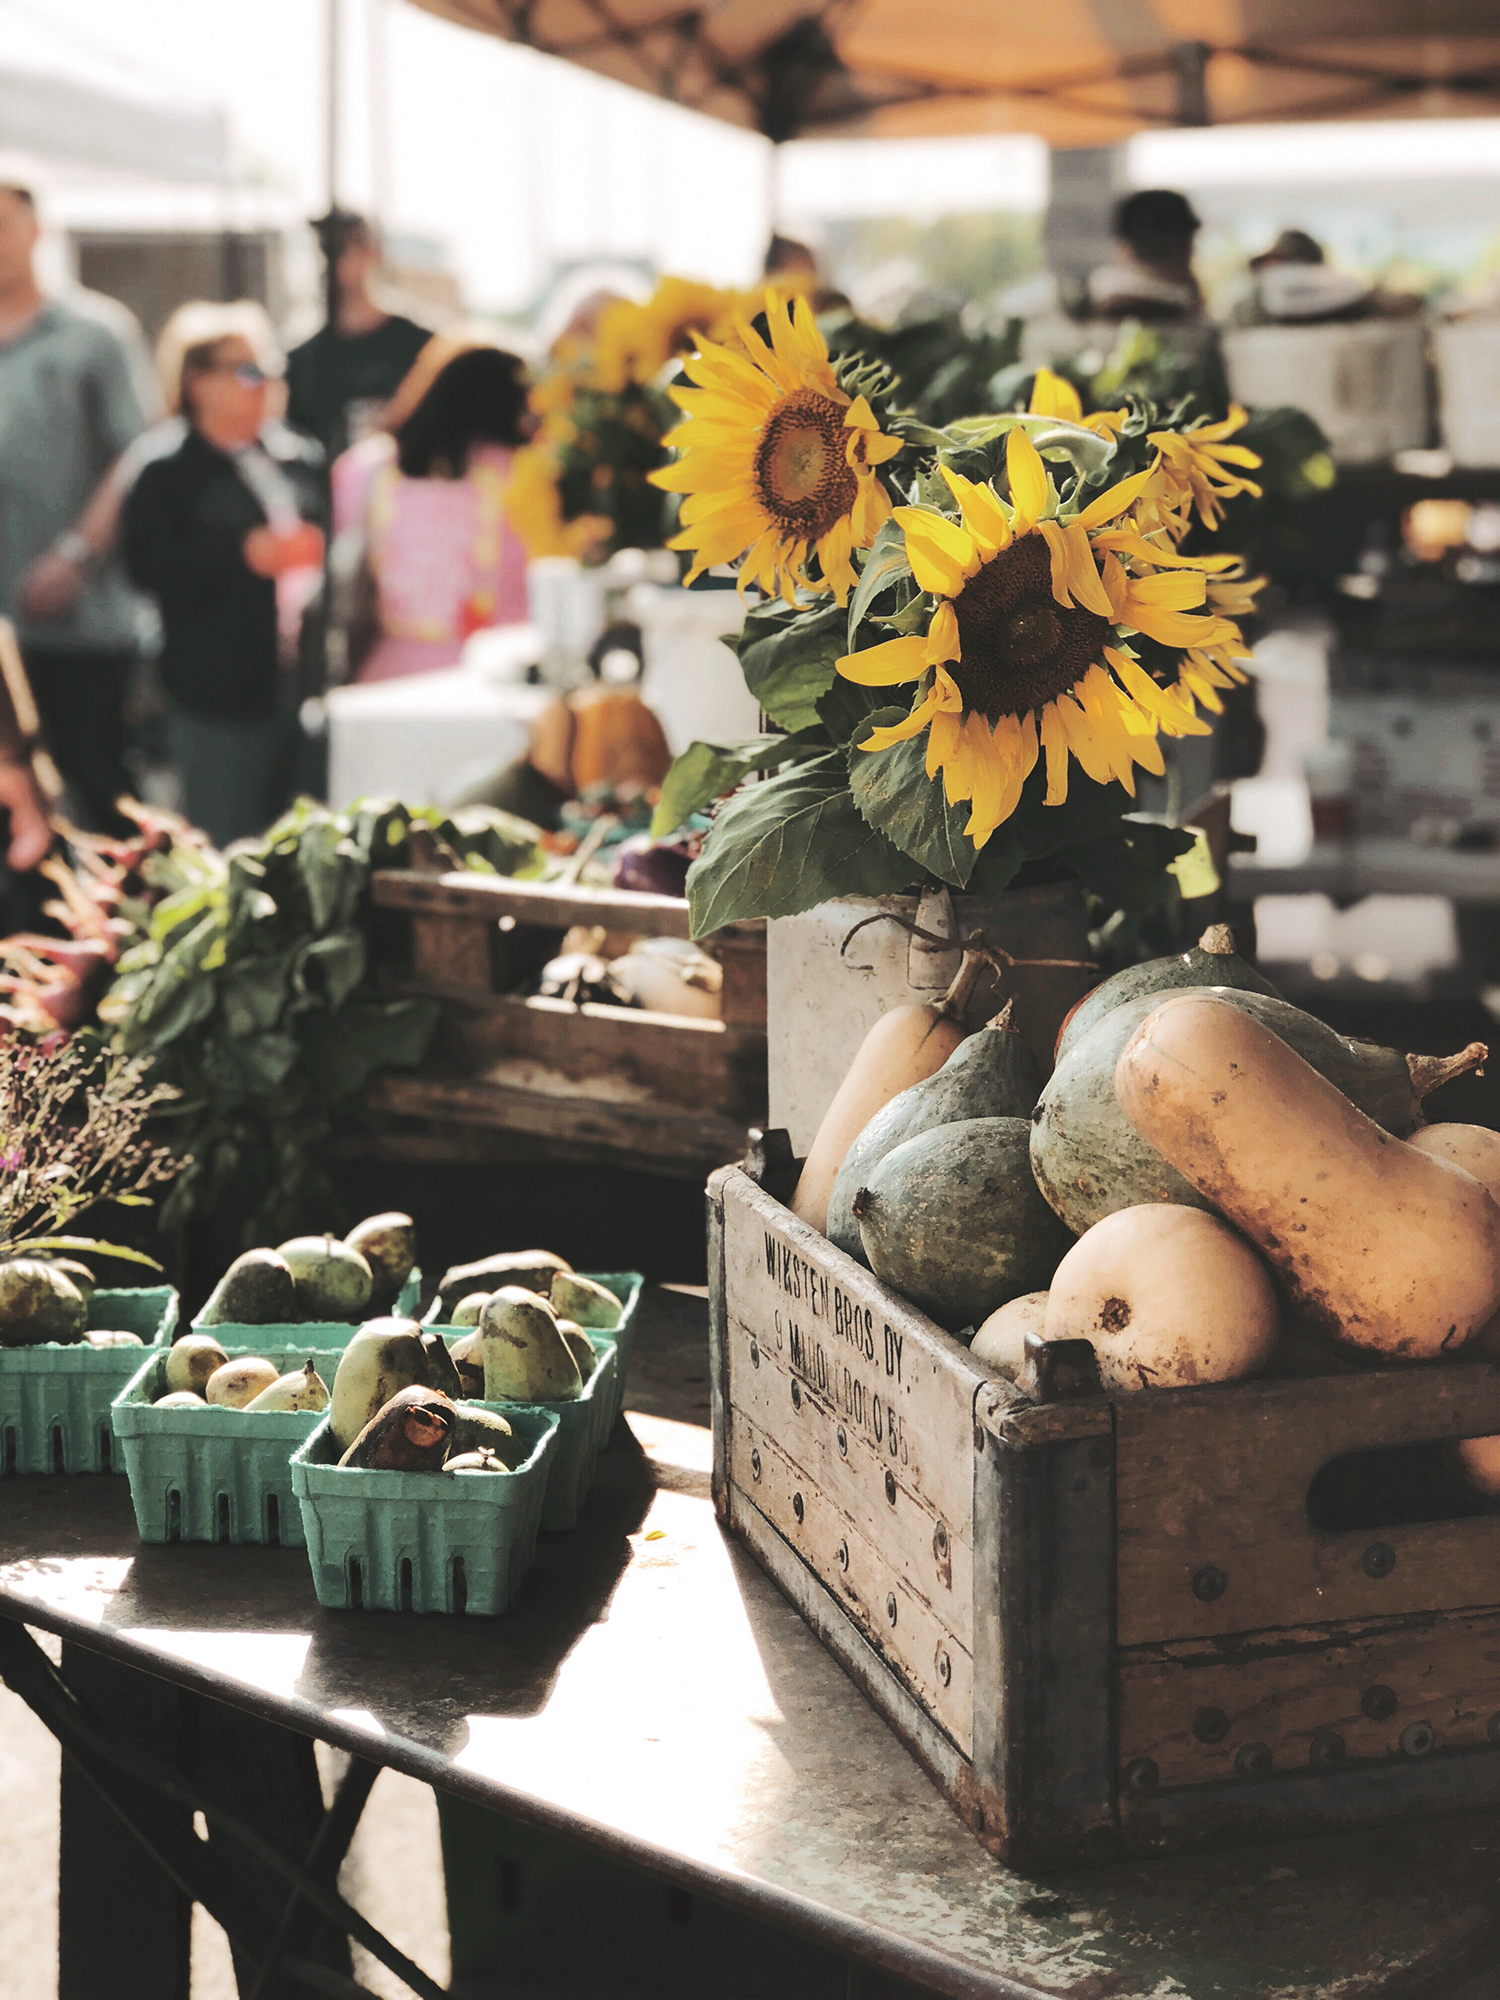 Saturdays at Franklin Farmers Market. A beautiful part of the town where farmers and makers gather to sell their goods. It's one of my favorite weekly traditions and I am sharing a peek into the experience. Catch it all on Haus of Layne! #FranklinTennessee #ThingsToDoInFranklinTennessee #FranklinFarmersMarket #NashvilleTennessee #ThingsToDoInNashville #FarmToTable #OrganicFoods #Farm #FreshFood #HealthyLiving #HealthyLifestyle